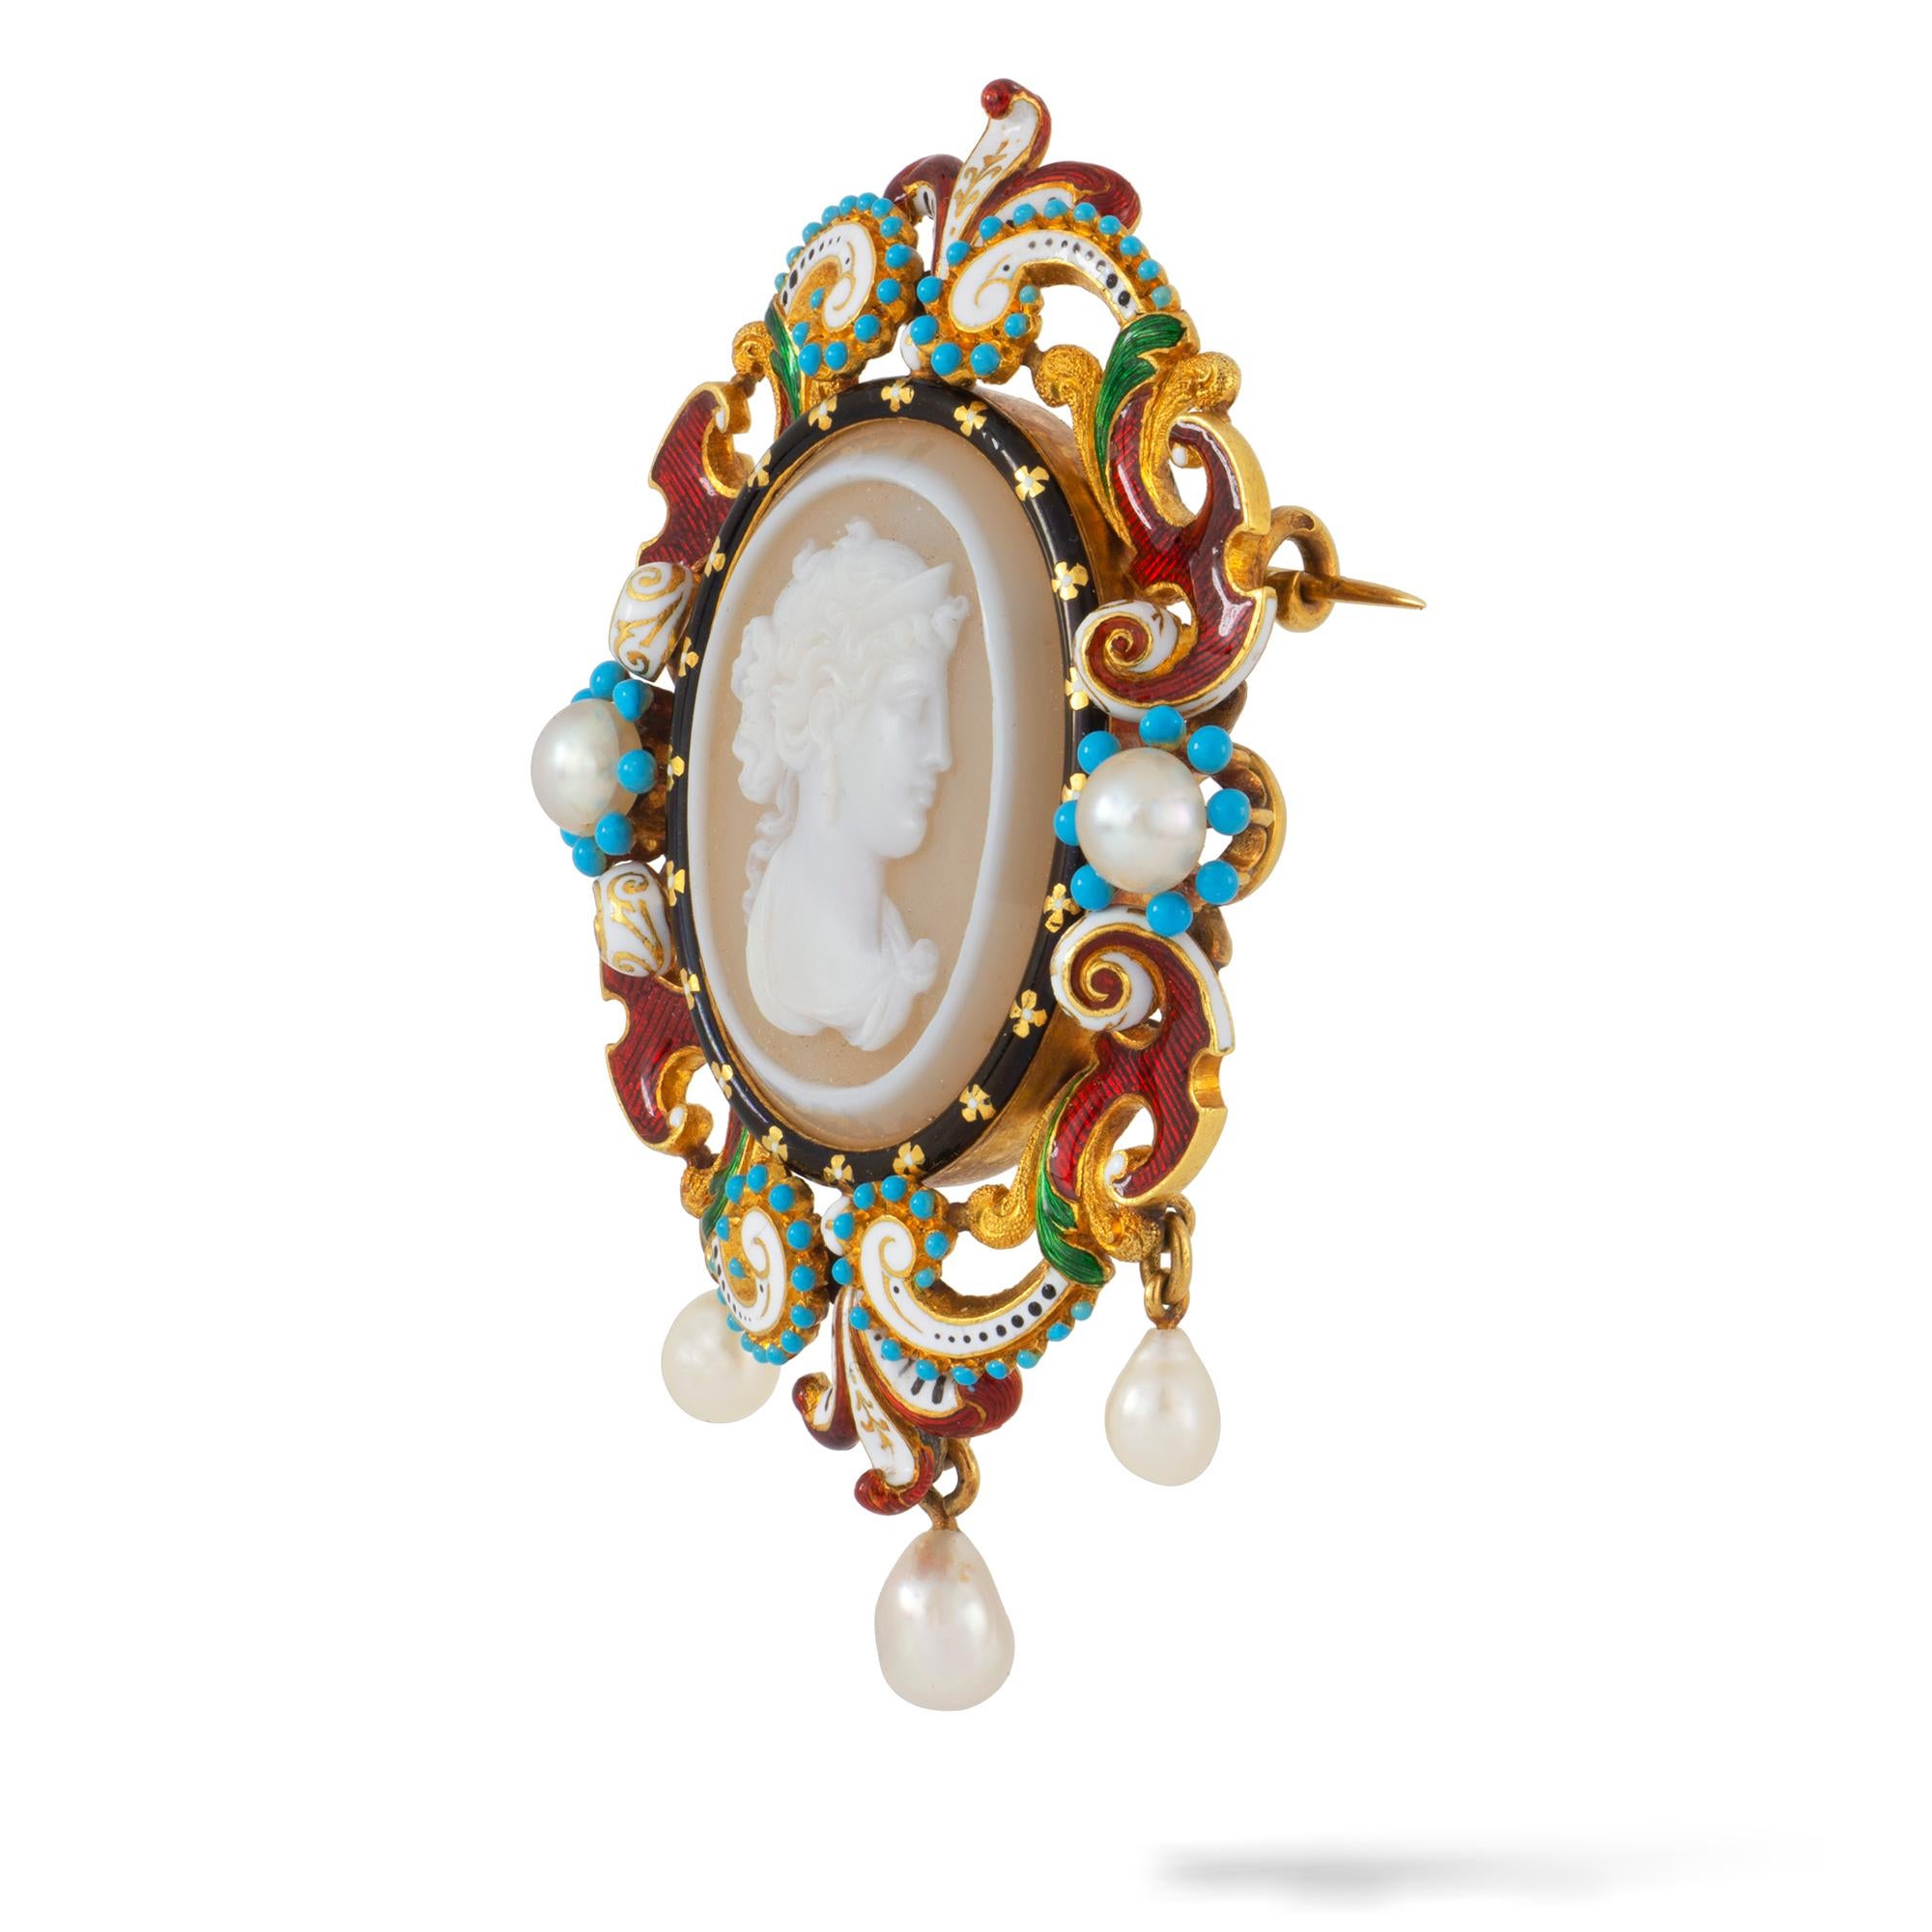 An Important Charles Duron Renaissance Revival brooch, the oval hardstone cameo in classical style, depicting a female in profile, to a black enamel decorated frame, flanked by two pearls within turquoise enamel bead clusters, the scroll designed